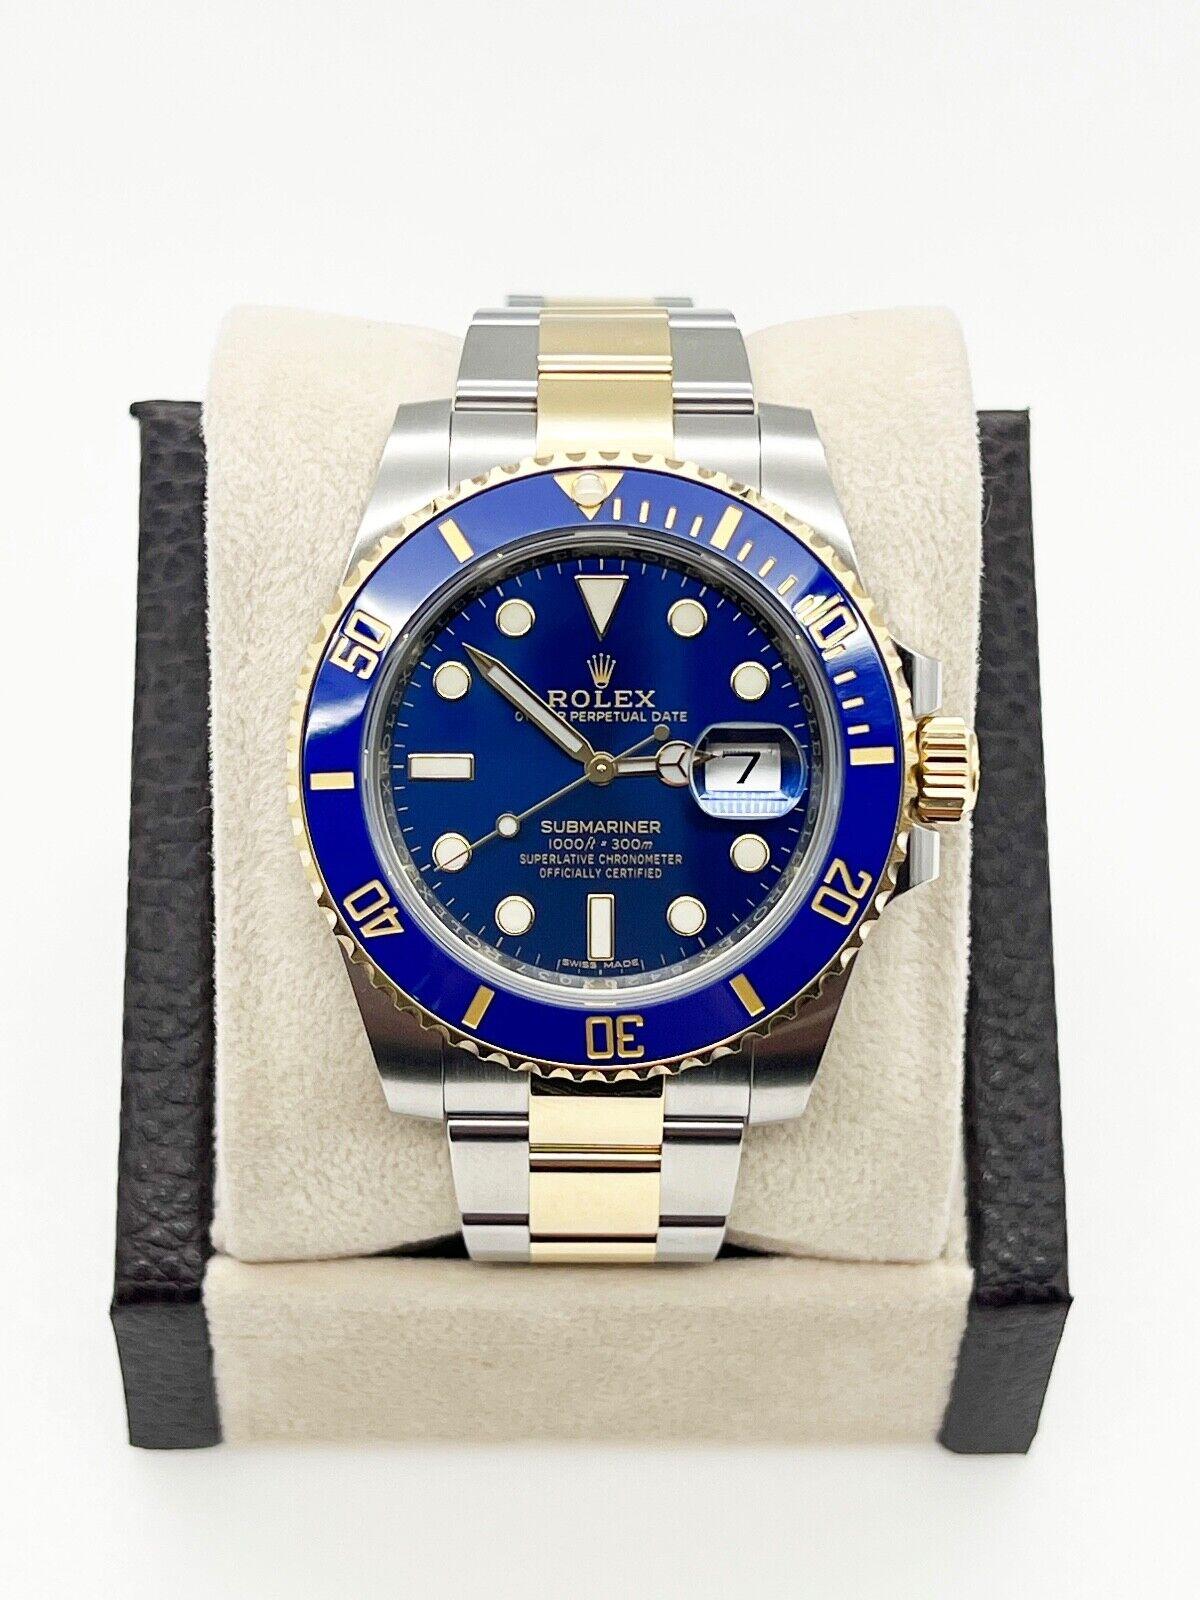 2020 Rolex Submariner 116613 Blue Ceramic 18K Yellow Gold Stainless Box Paper In Excellent Condition For Sale In San Diego, CA